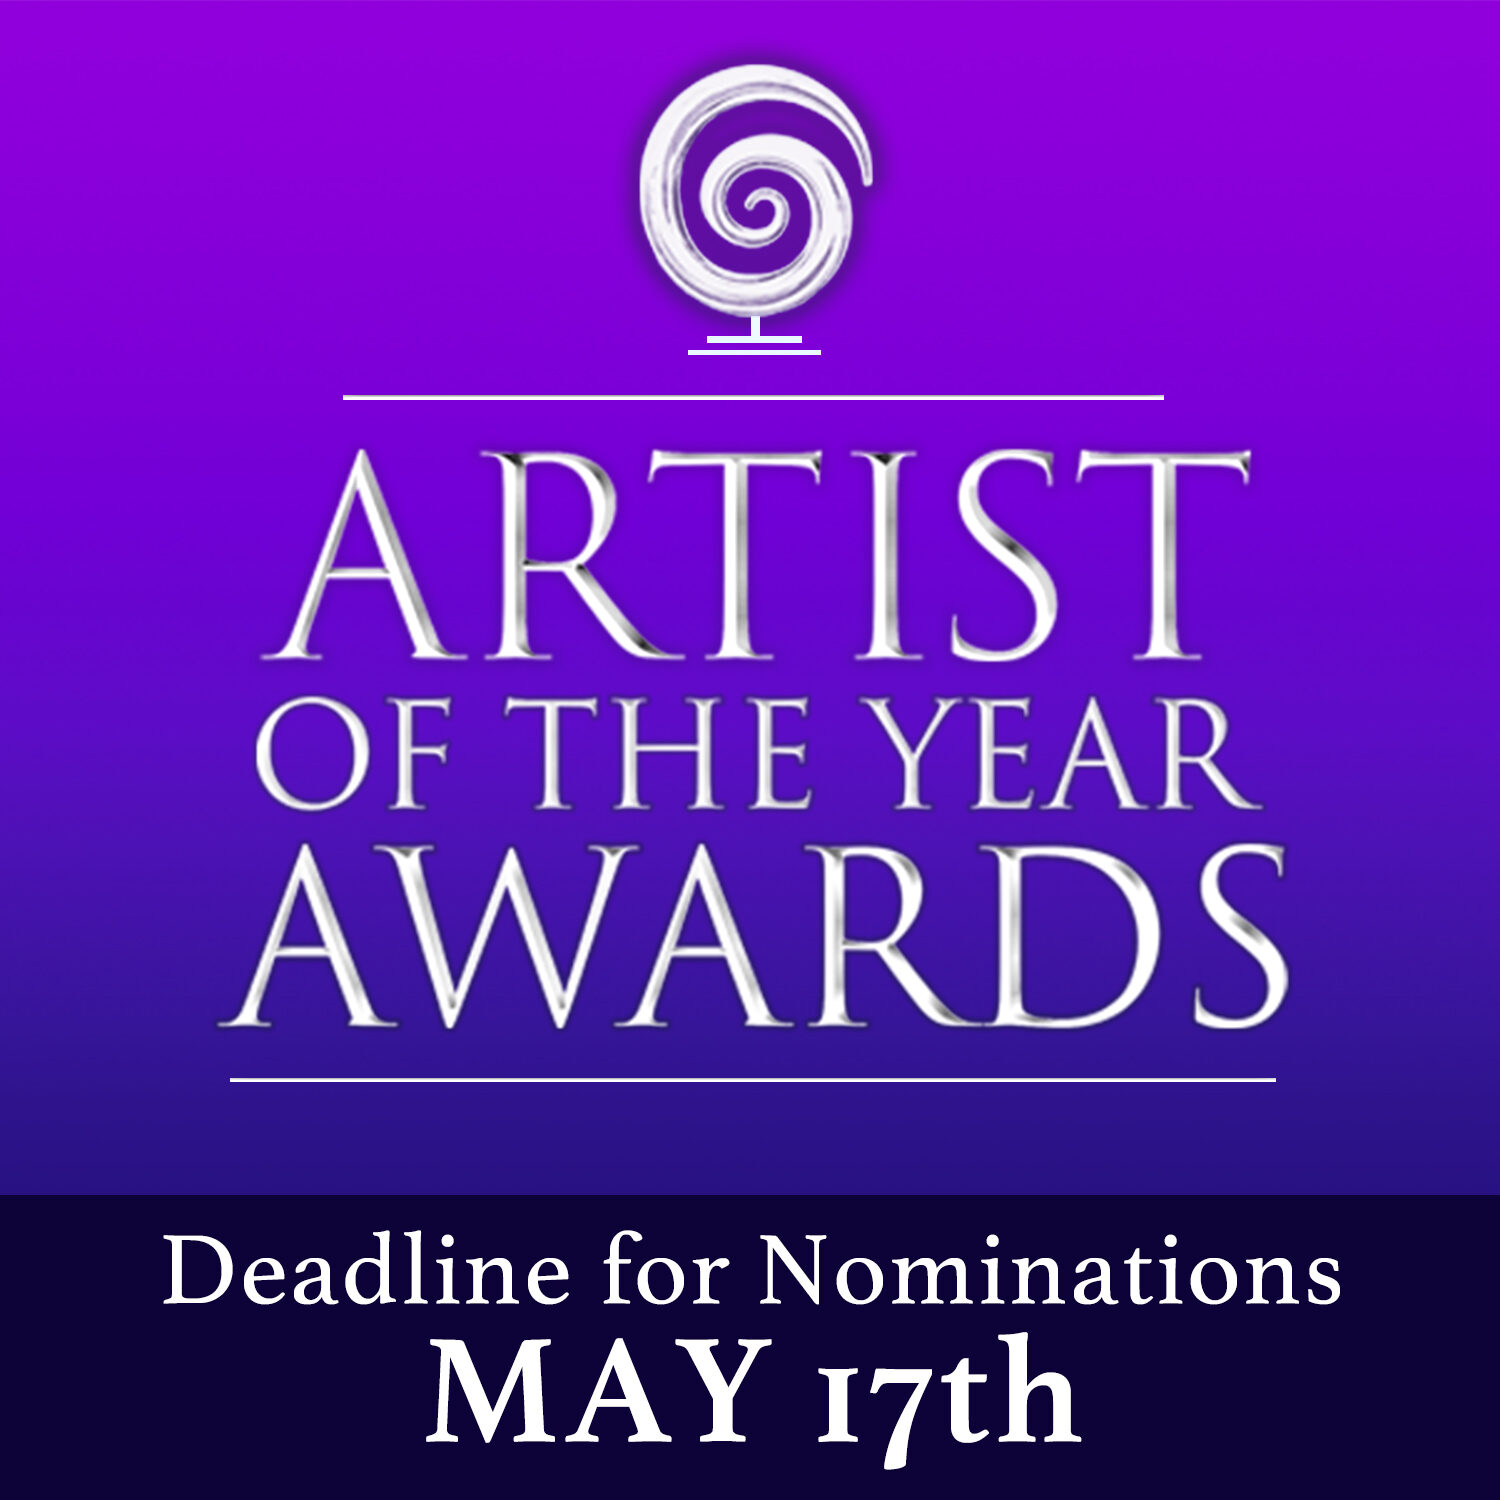 Artist of the Year Awards title